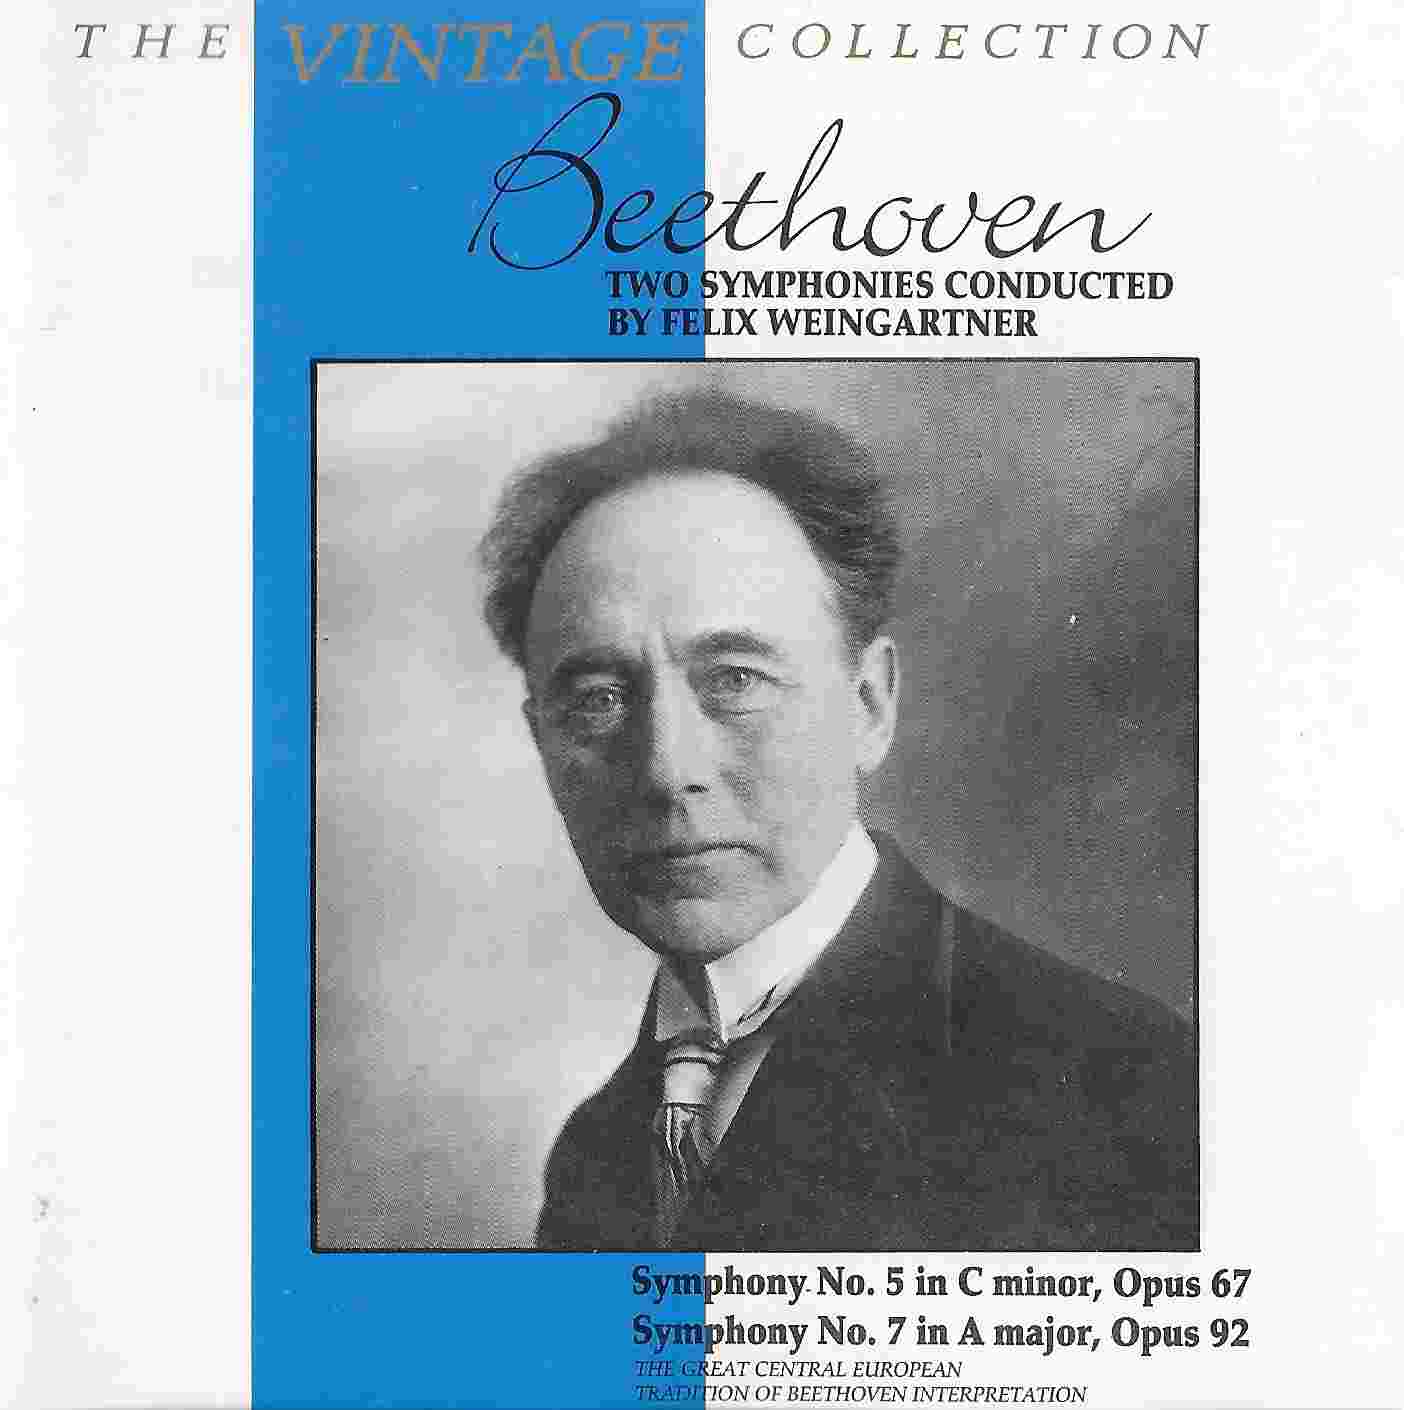 Picture of BBCCD784 The vintage collection - Beethoven / Weingartner by artist Beethoven / Weingartner from the BBC cds - Records and Tapes library